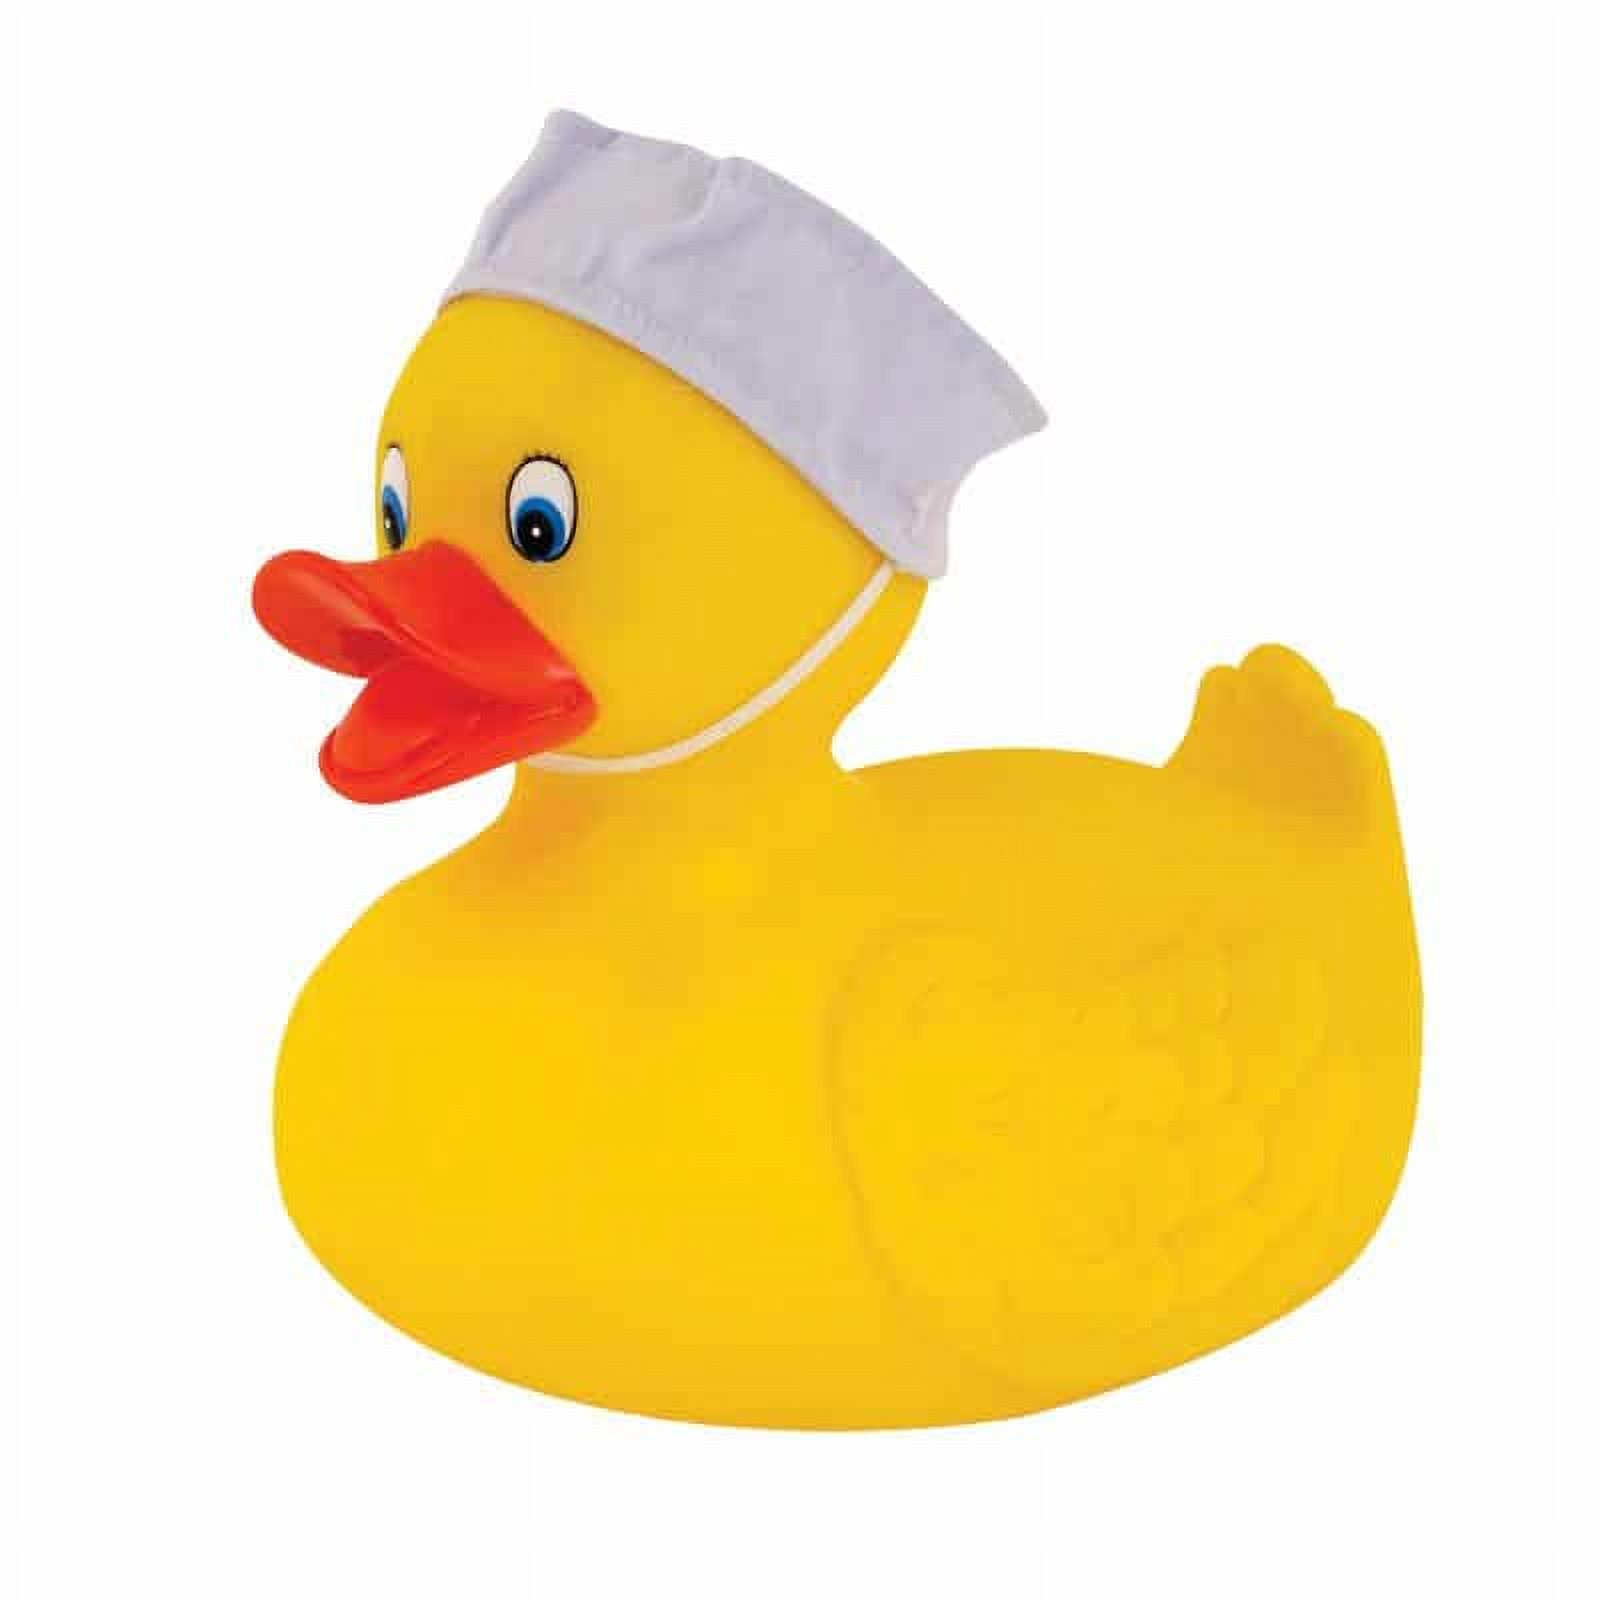 Schylling Large Classic Yellow Rubber Ducky (10in tall, styles vary) - image 2 of 7